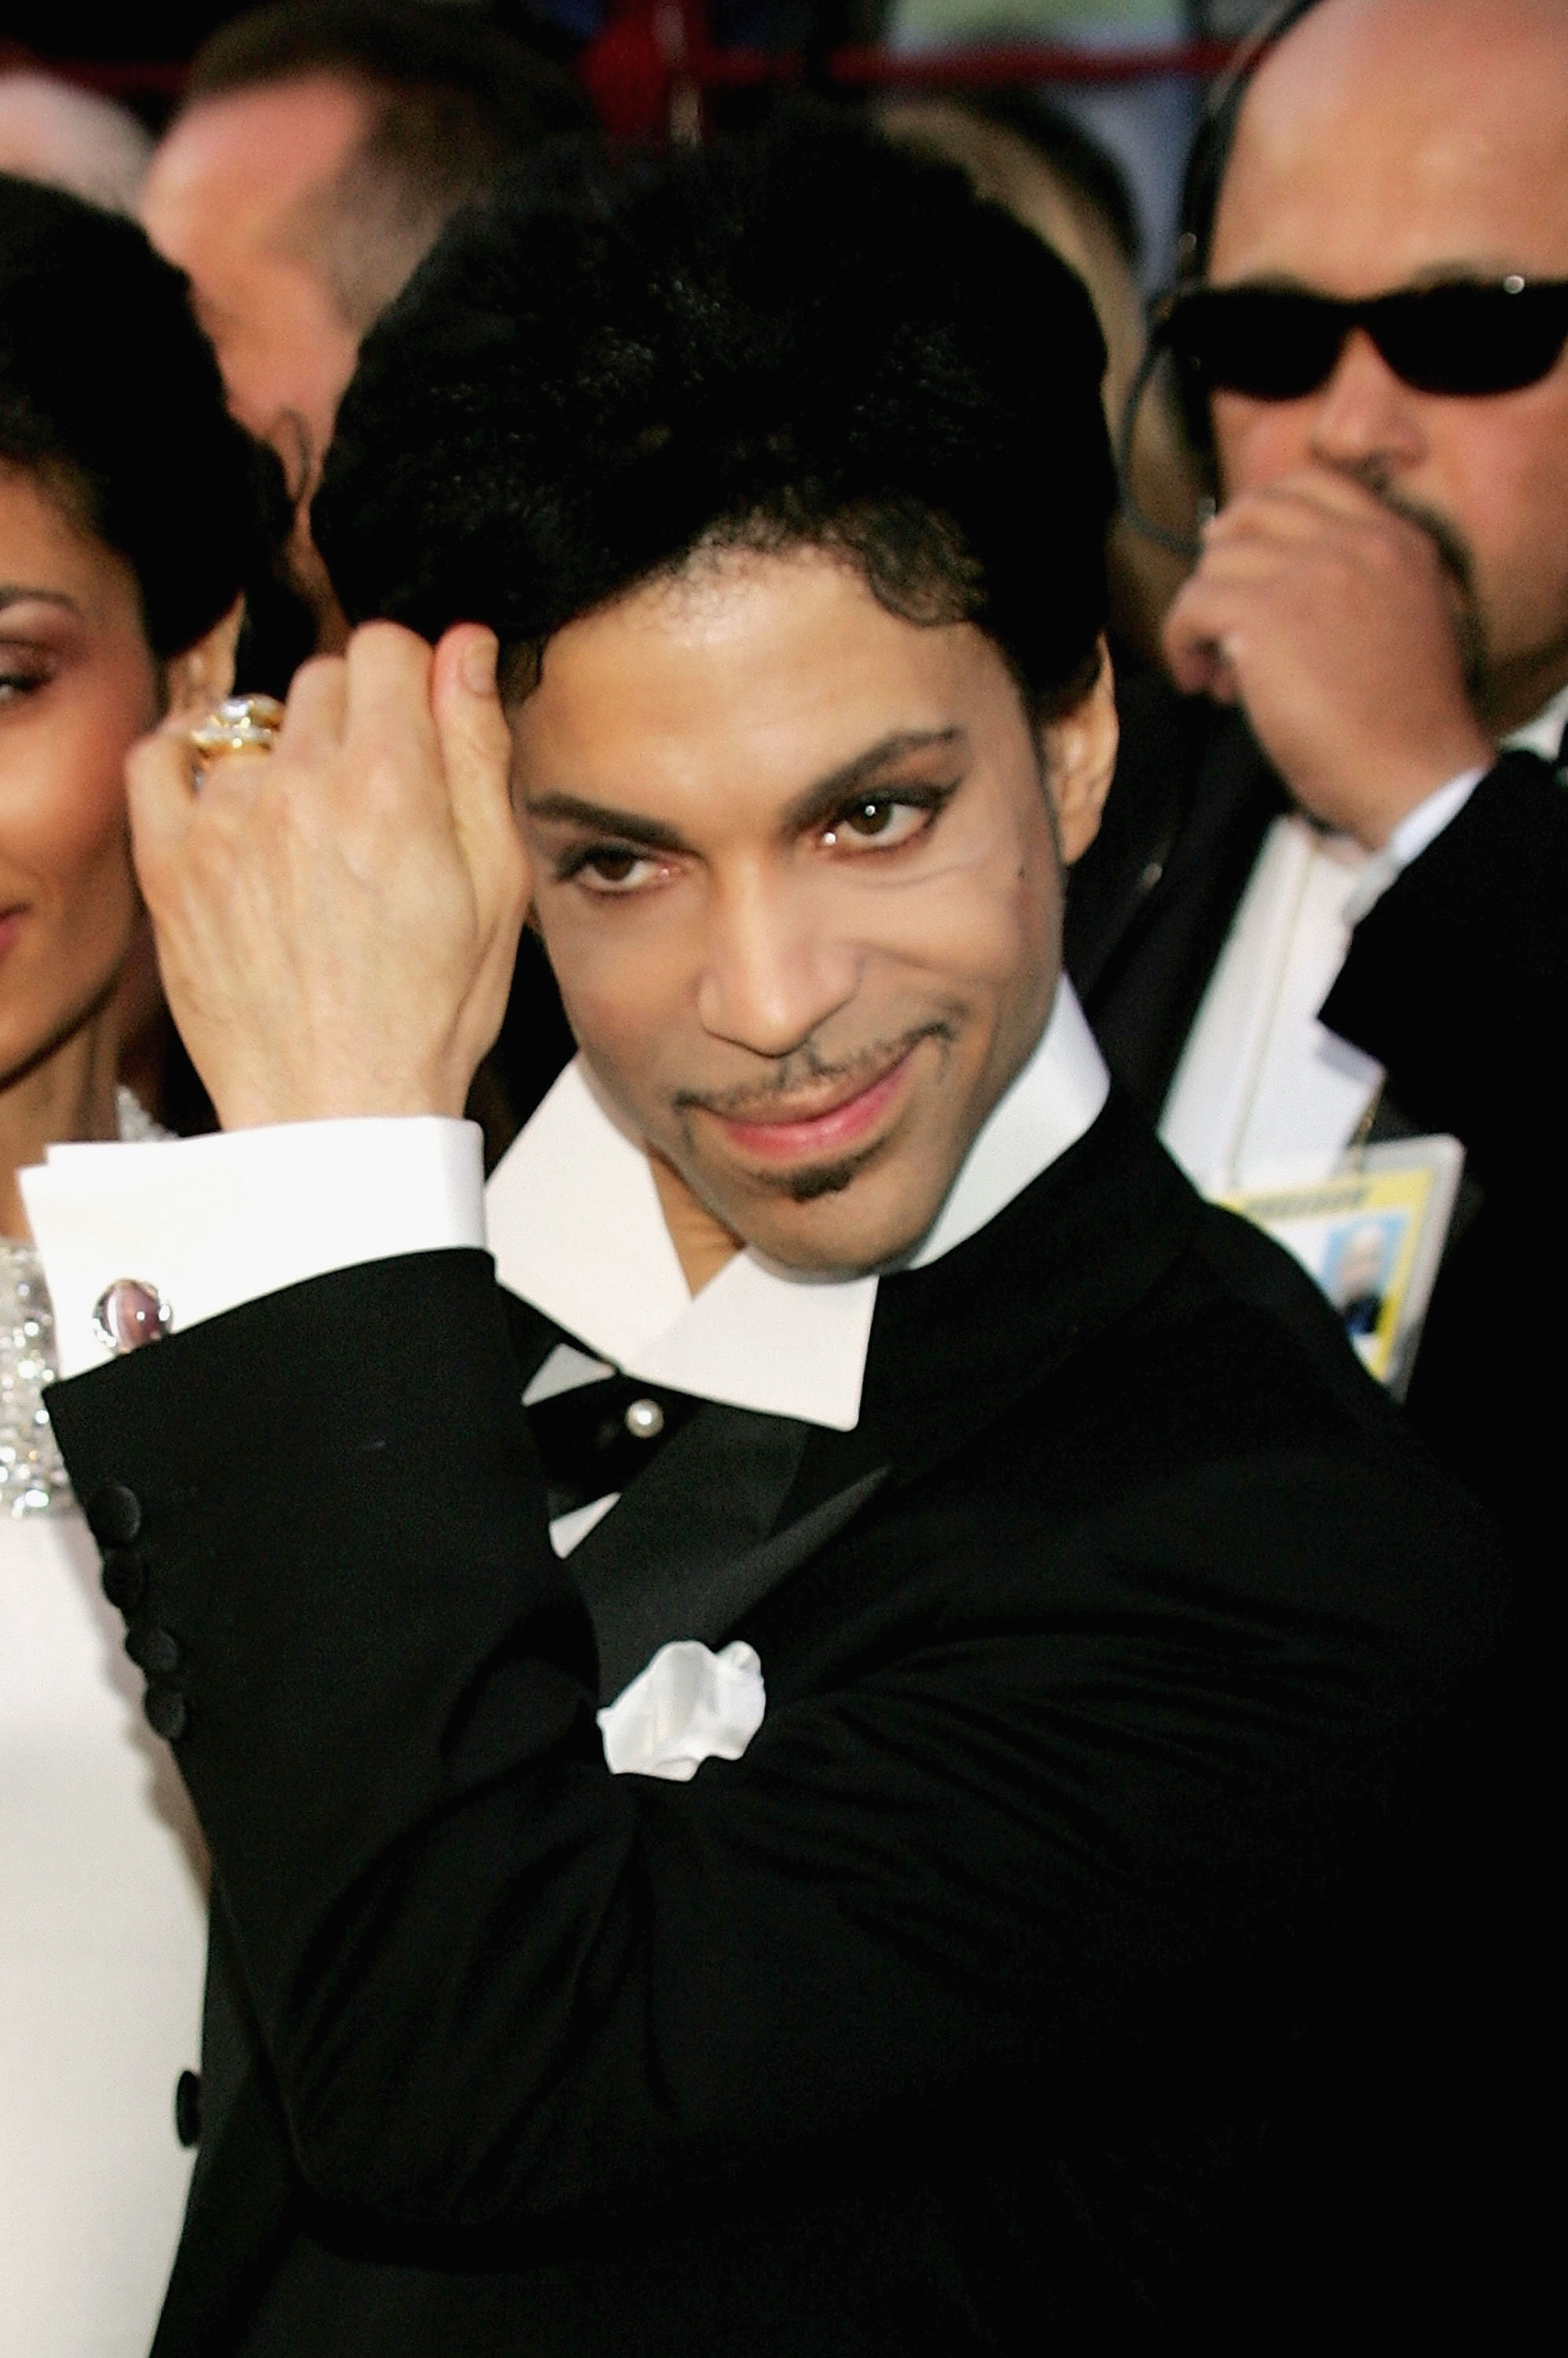 Prince attends the 77th Annual Academy Awards on February 27, 2005 in Hollywood, California | Source: Getty Images